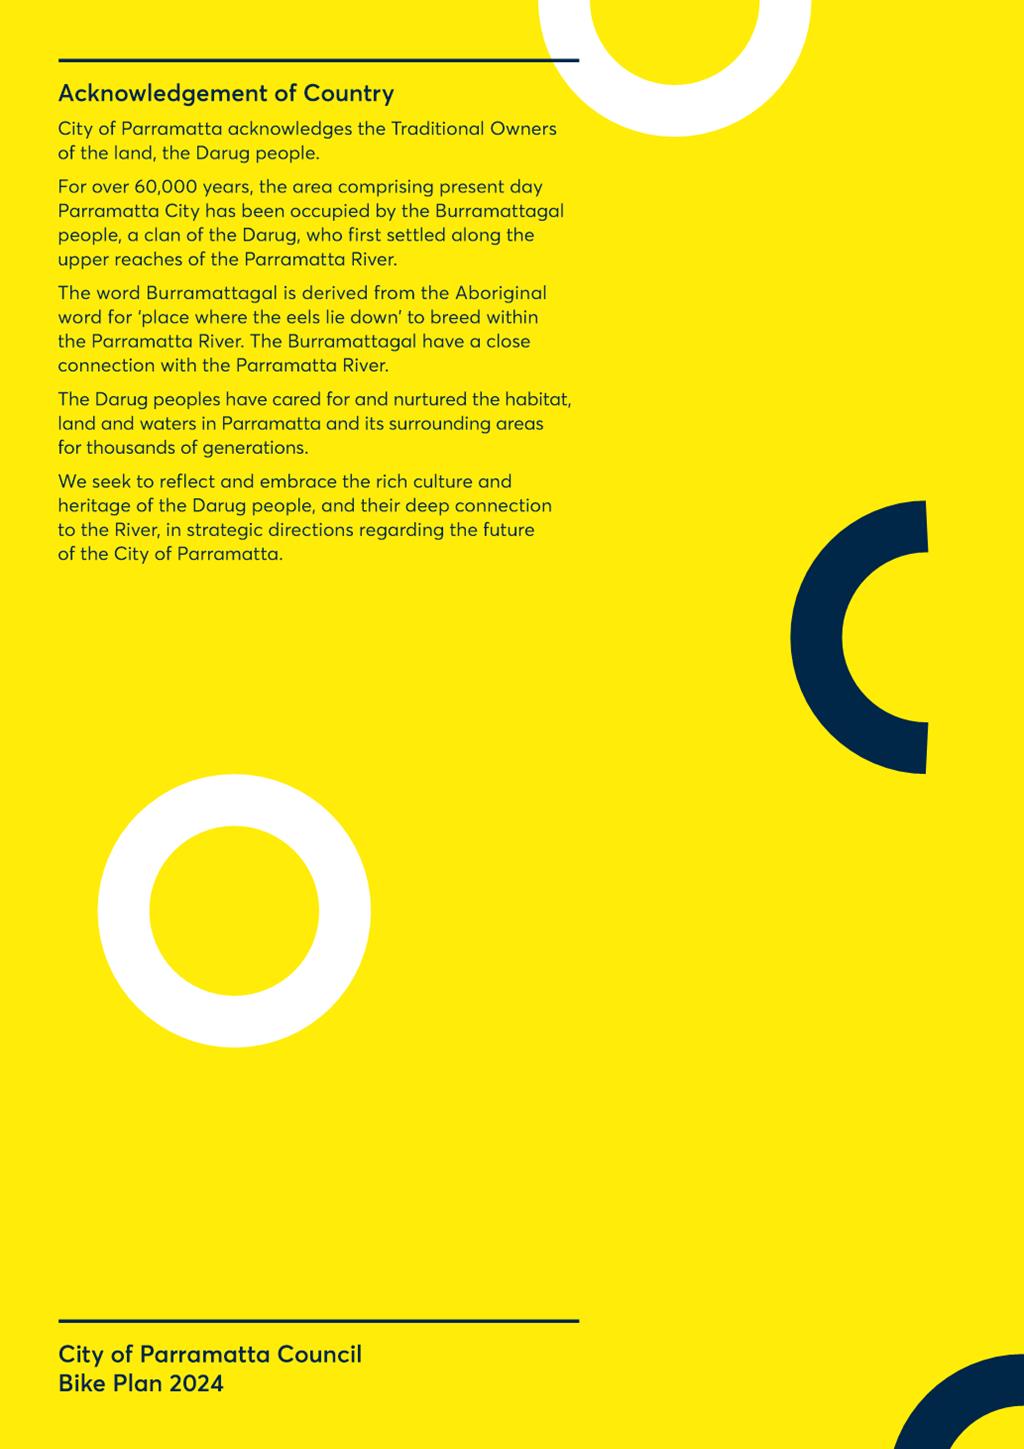 A yellow background with black text and blue circles

Description automatically generated